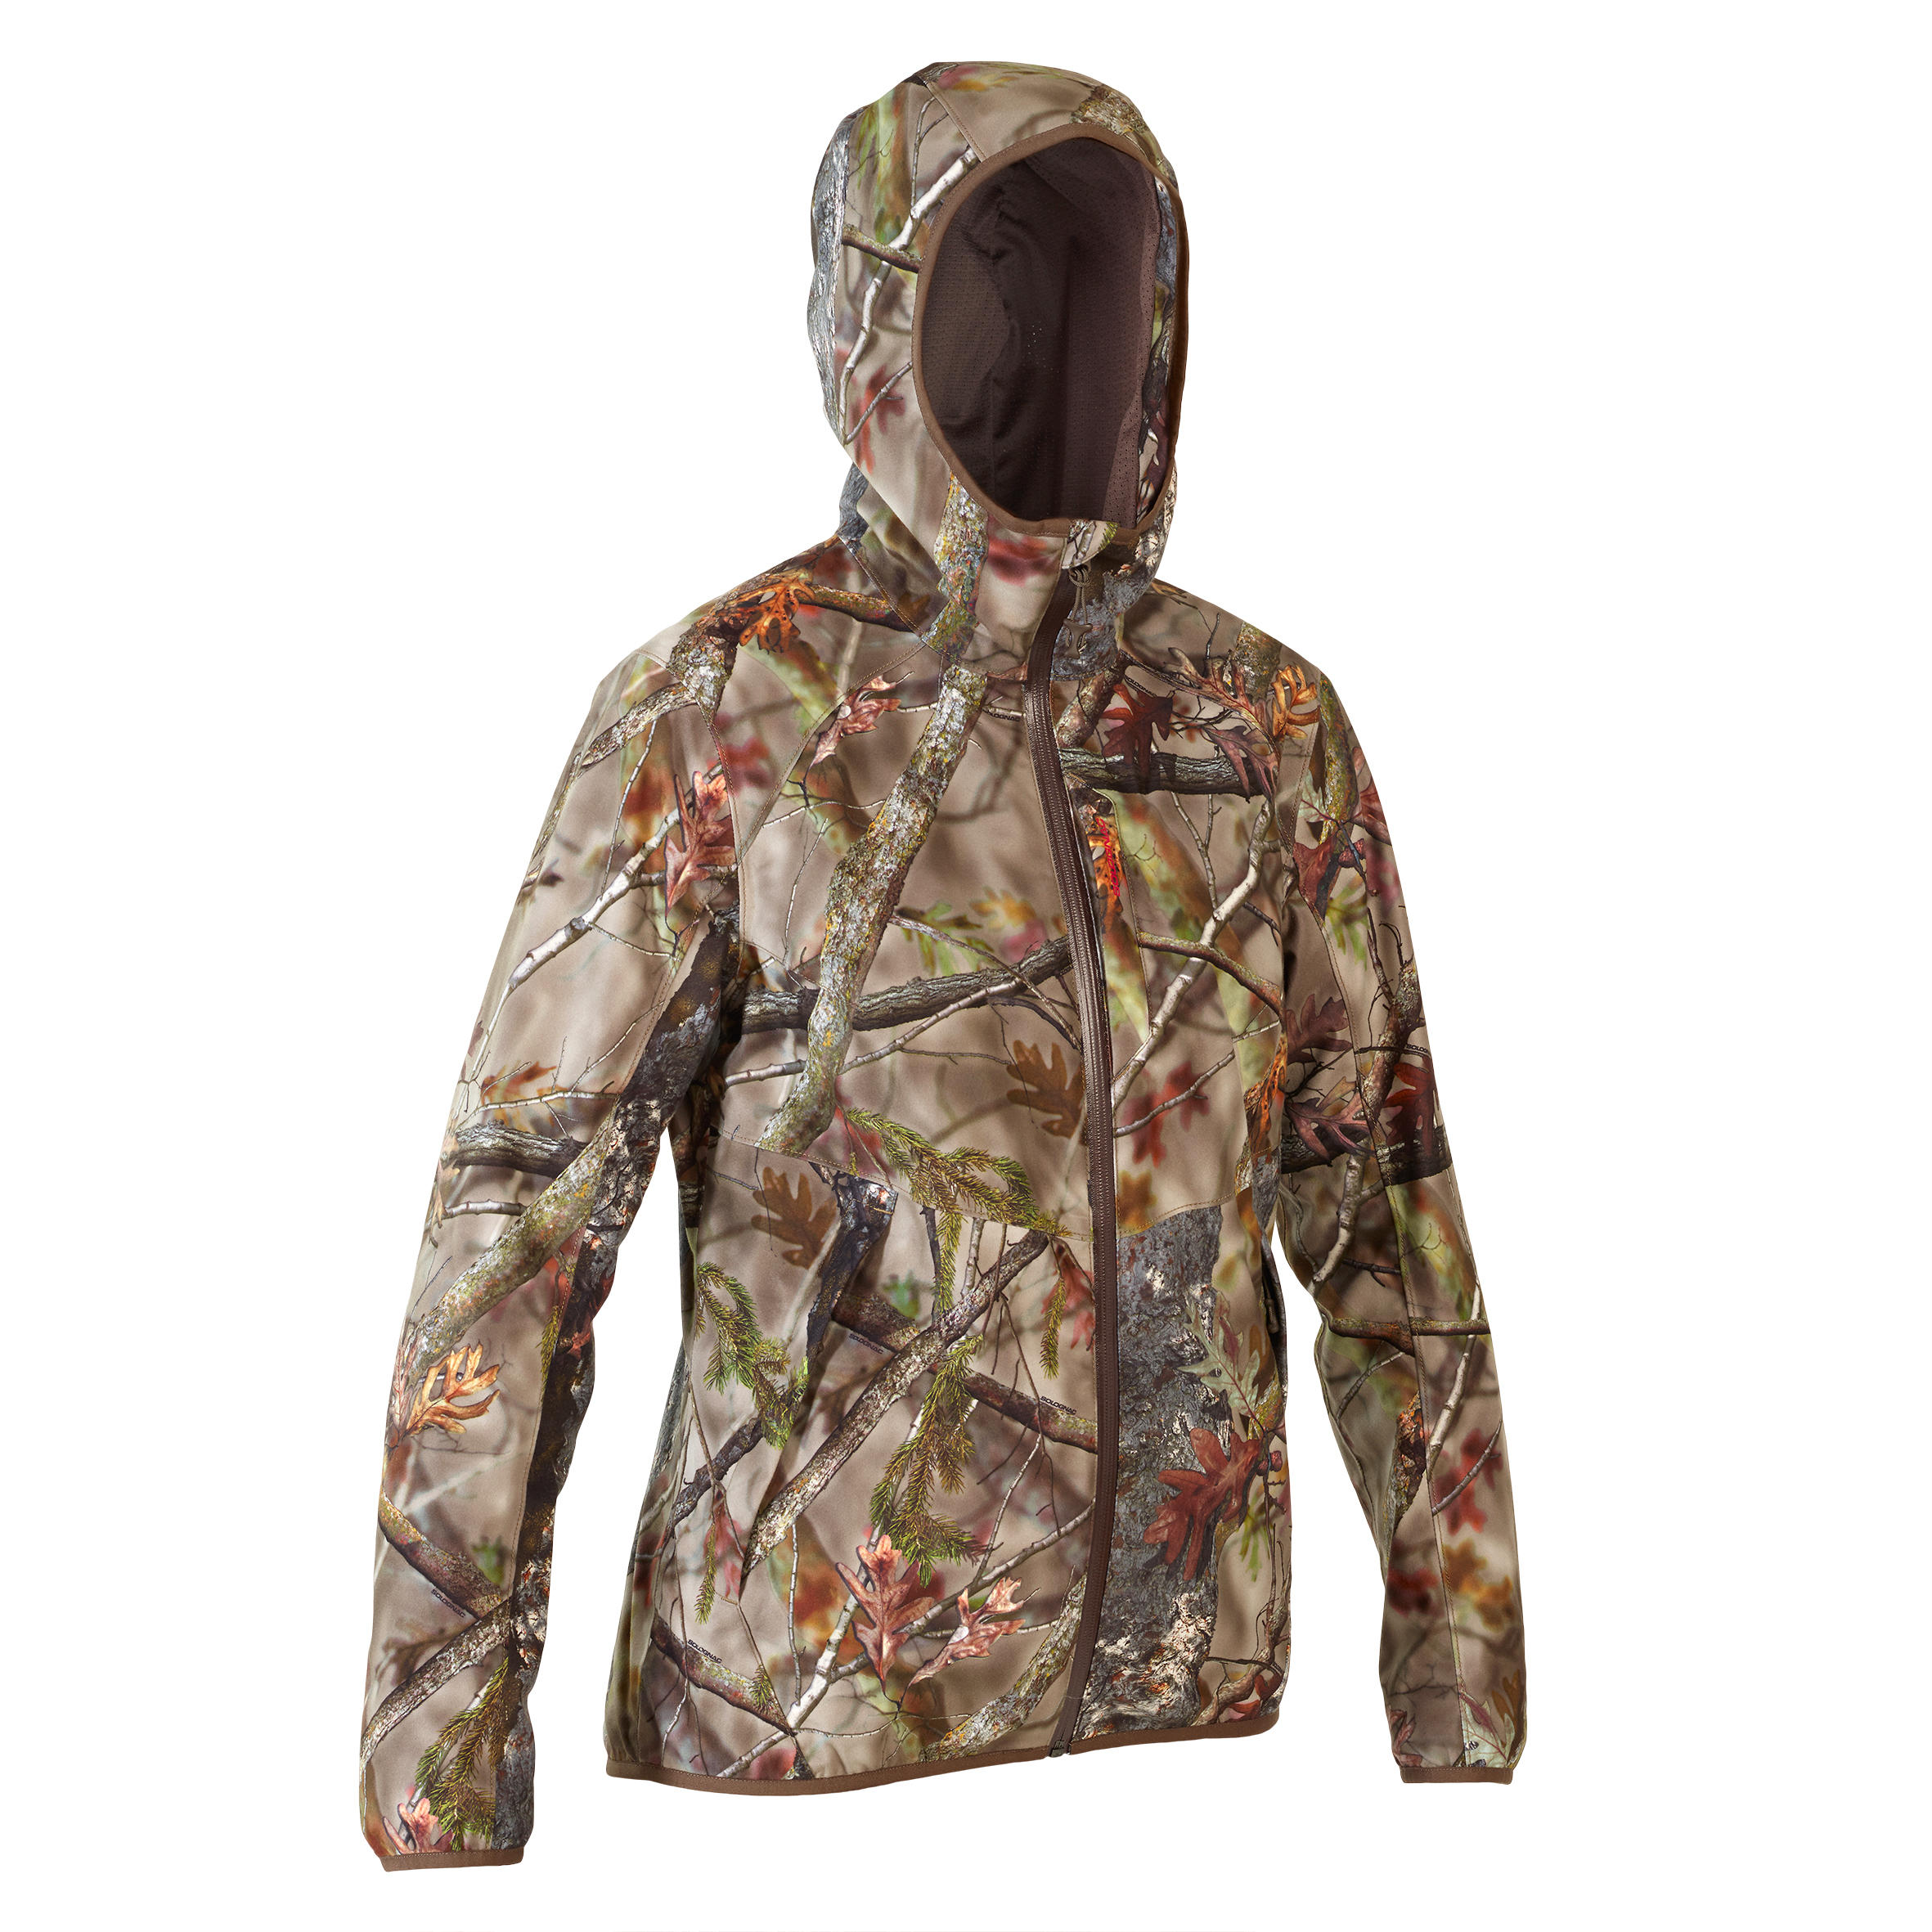 SOLOGNAC Women's Light, Silent and Breathable Jacket - Brown Camo